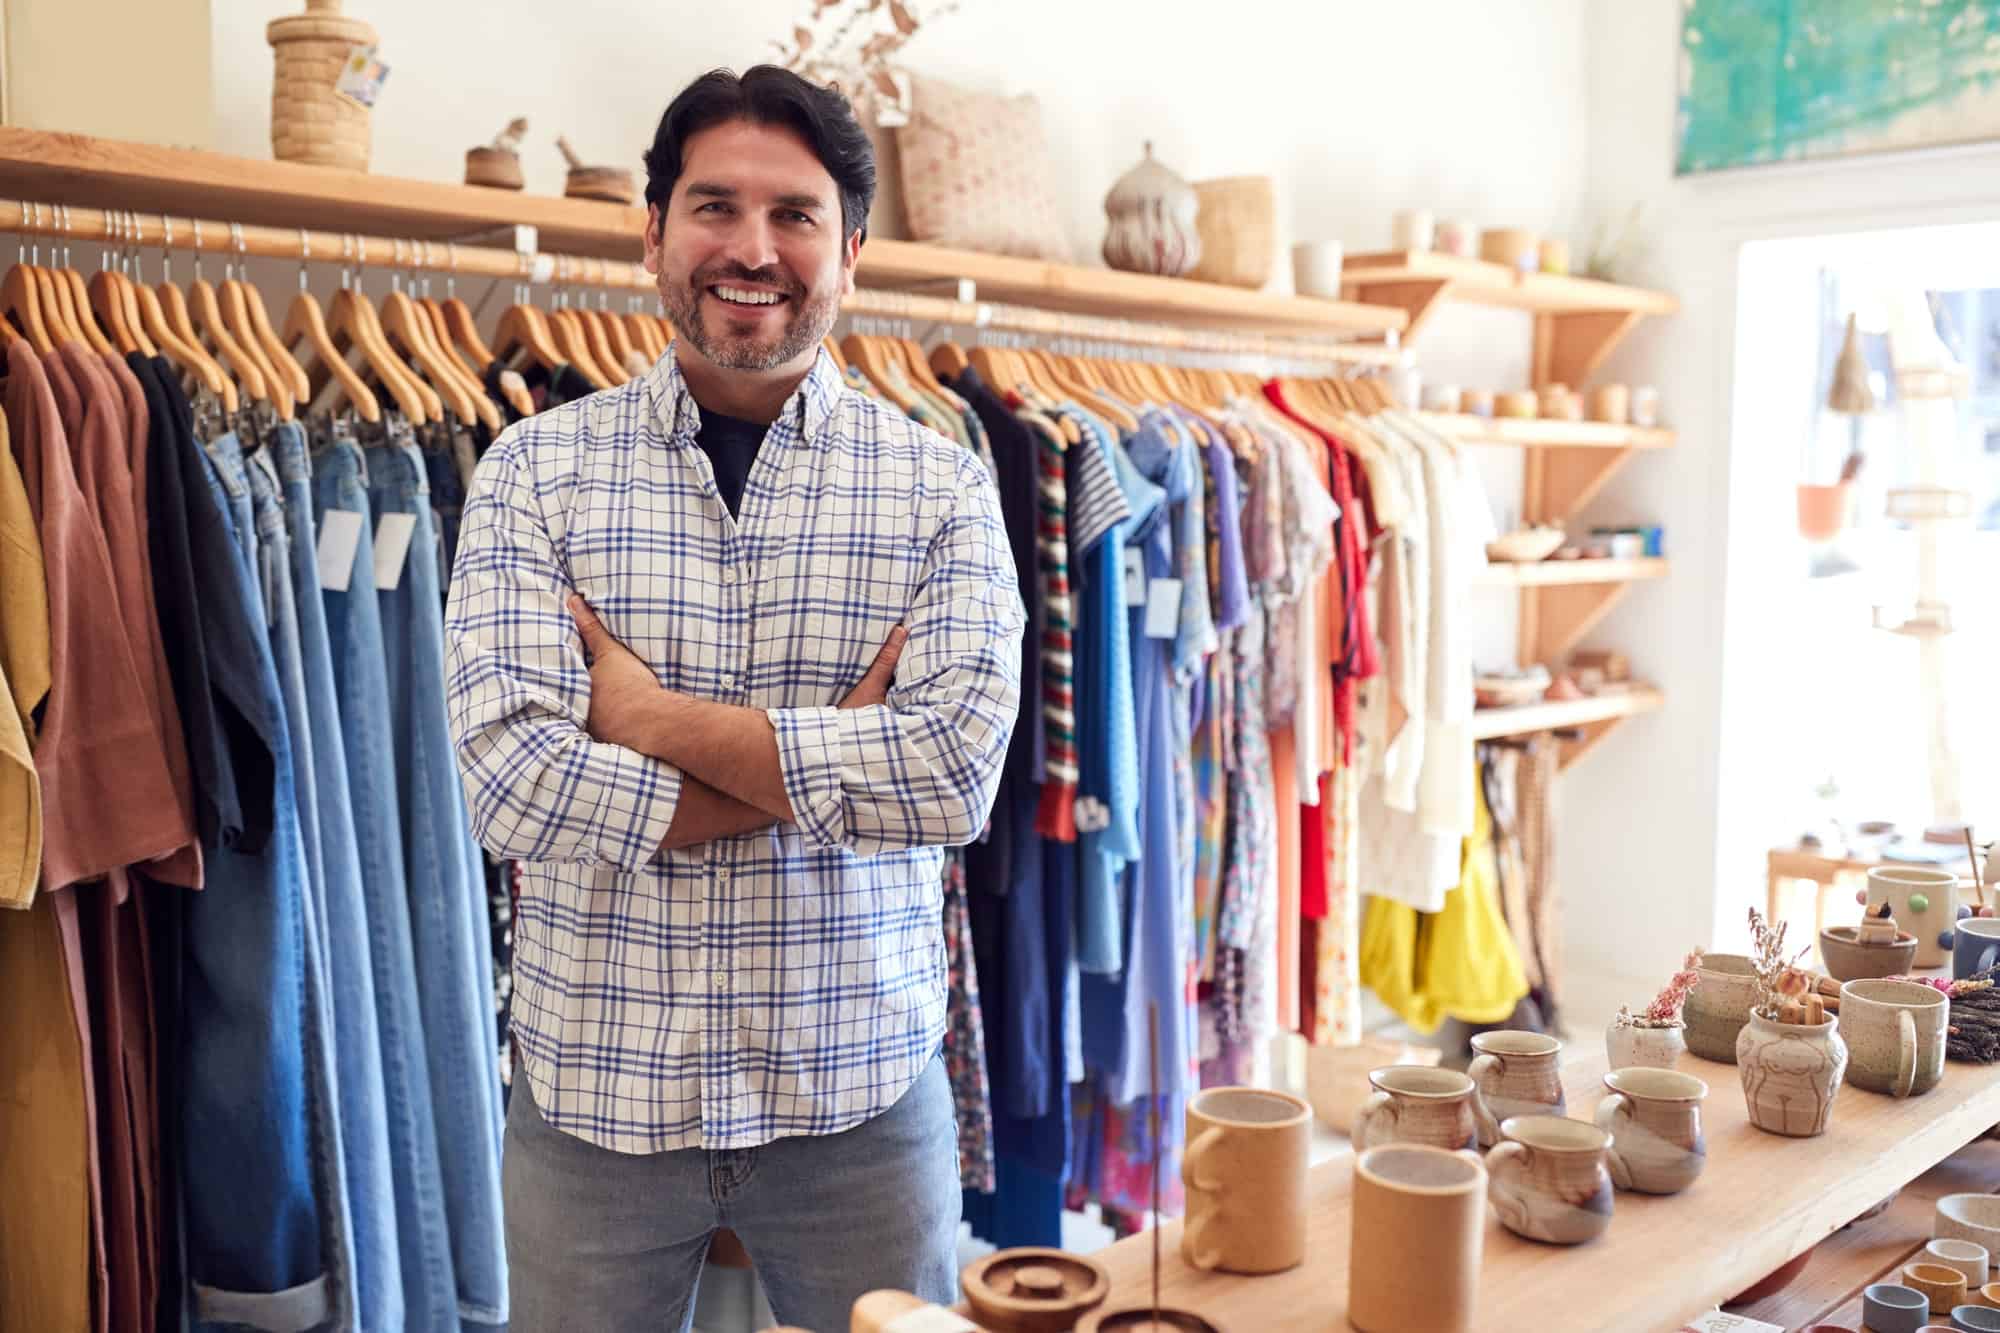 Portrait Of Male Owner Of Fashion Store Standing In Front Of Clothing On Rails